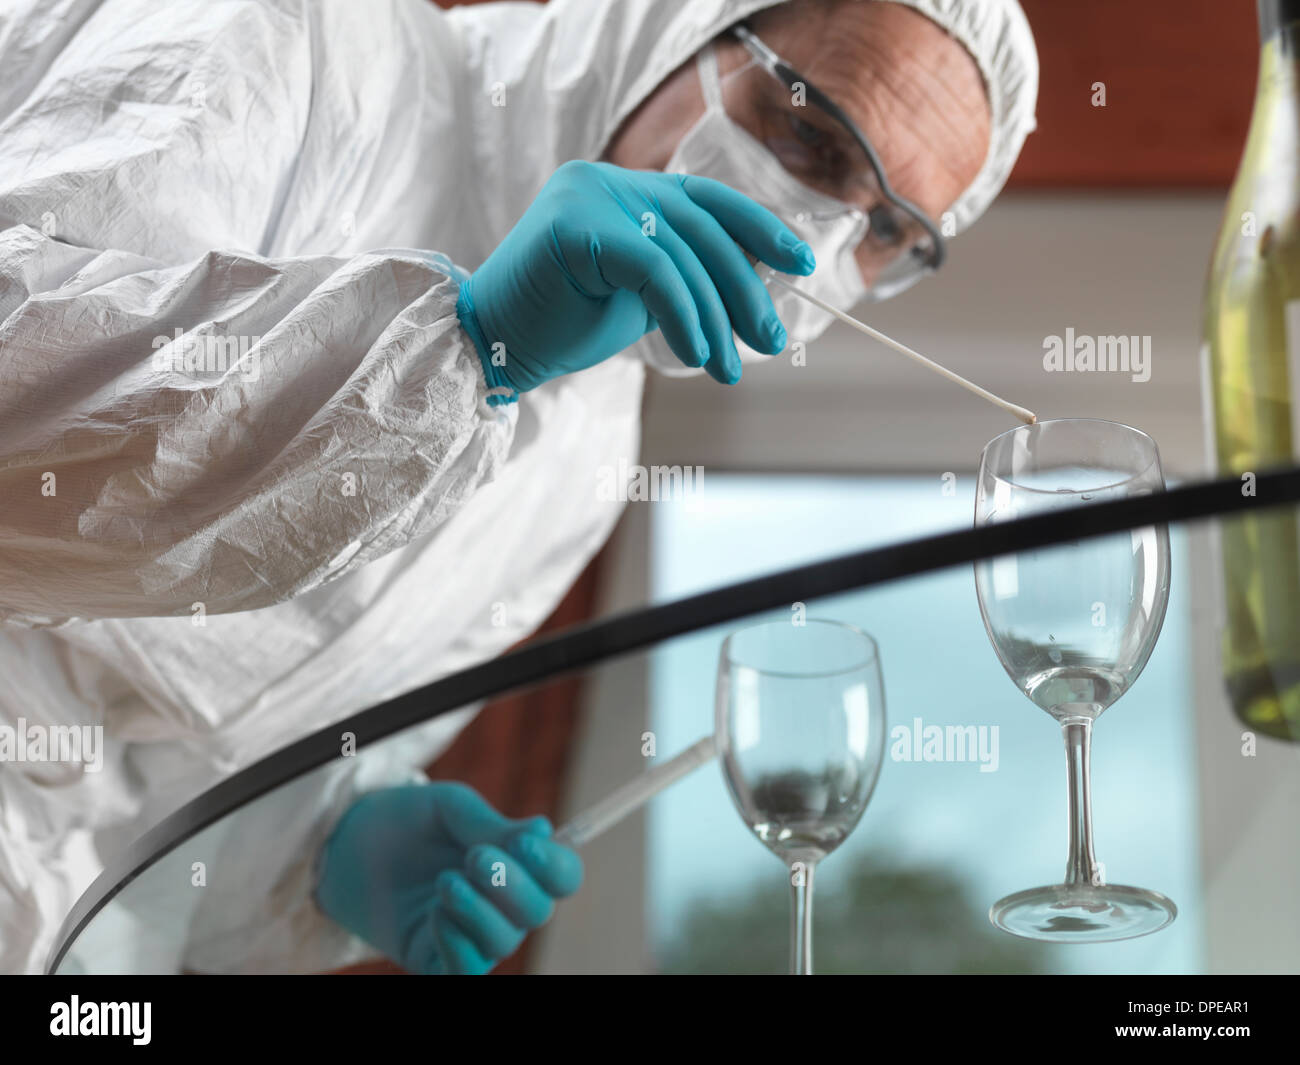 Forensic scientist using a DNA swab to take evidence from a glass at a scene of crime Stock Photo